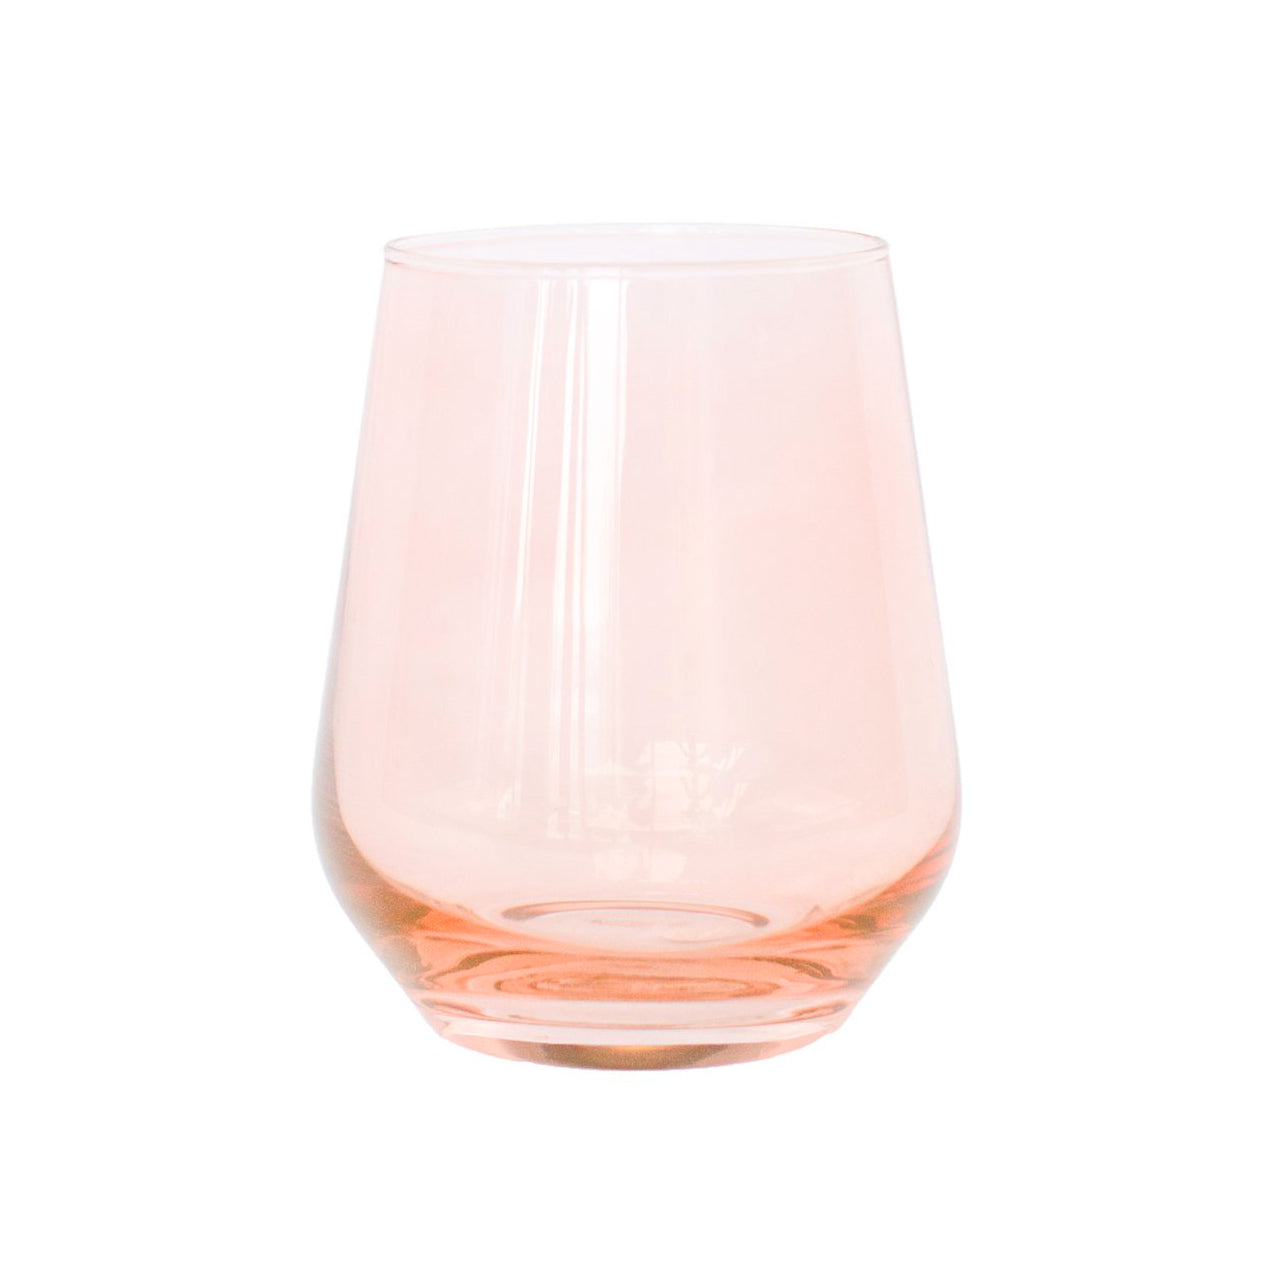 Set of Two Pink Tall Thick Stem Blown Glass Wine Glasses 